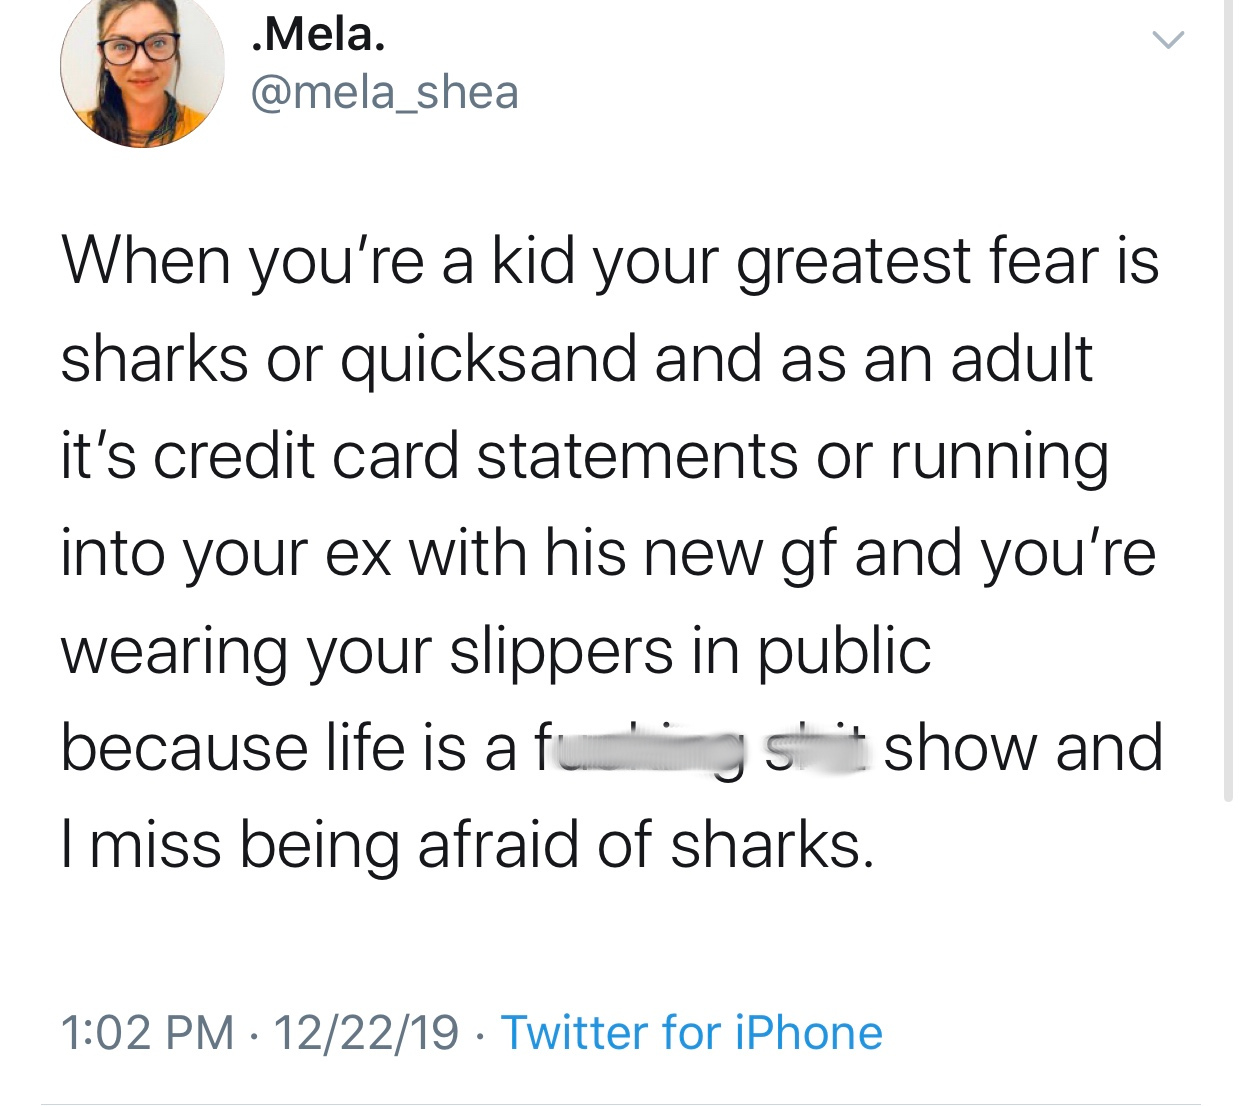 .Mela. When you're a kid your greatest fear is sharks or quicksand and as an adult it's credit card statements or running into your ex with his new gf and you're wearing your slippers in public because life is a fungs' show and I miss being afraid of…